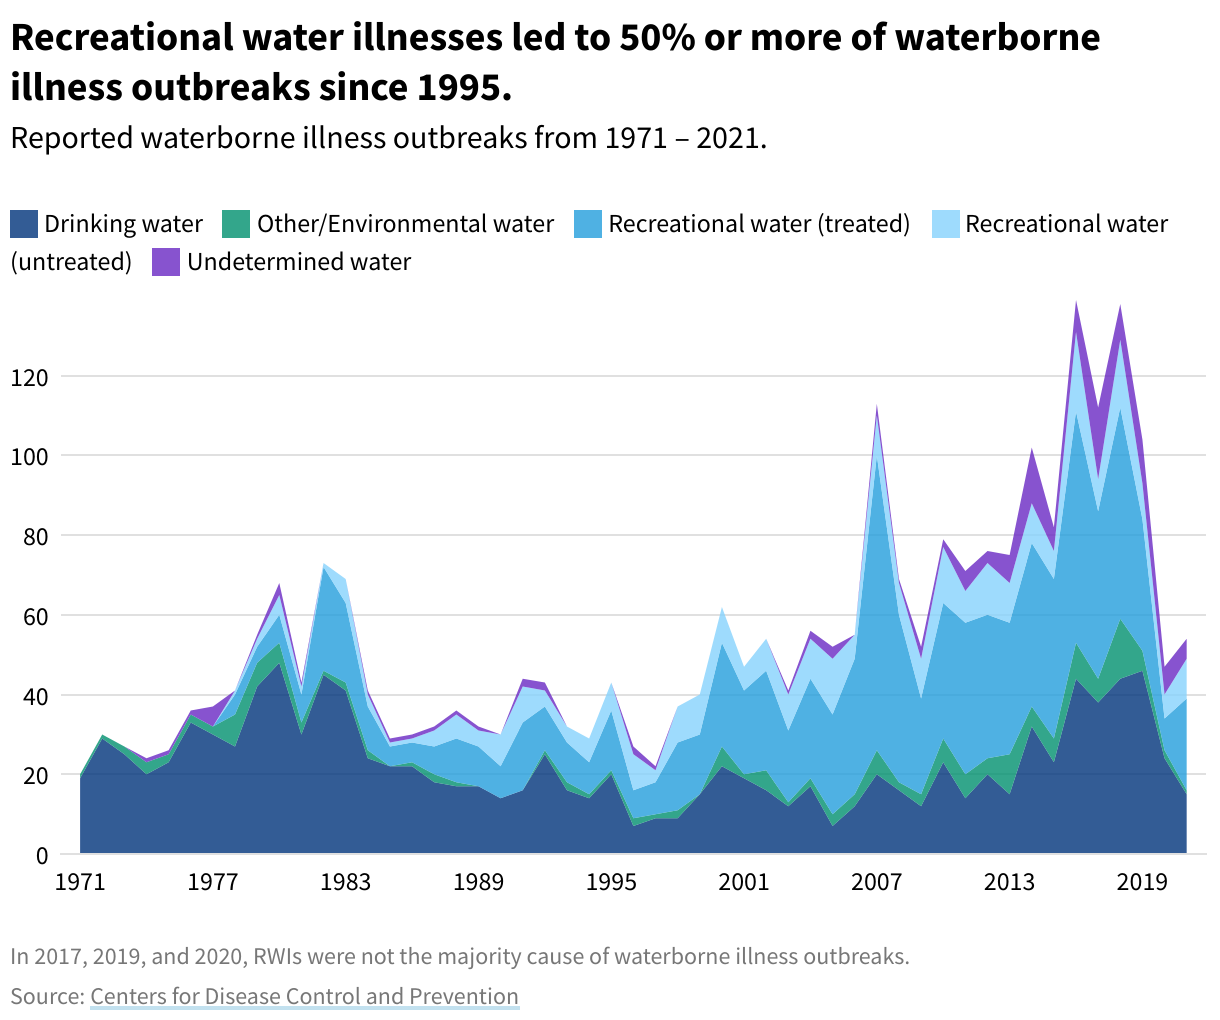 A stacked chart showing the breakdown of waterborne illnesses by drinking water, recreational water, other/environmental water, and undetermined water from 1971 to 2021.